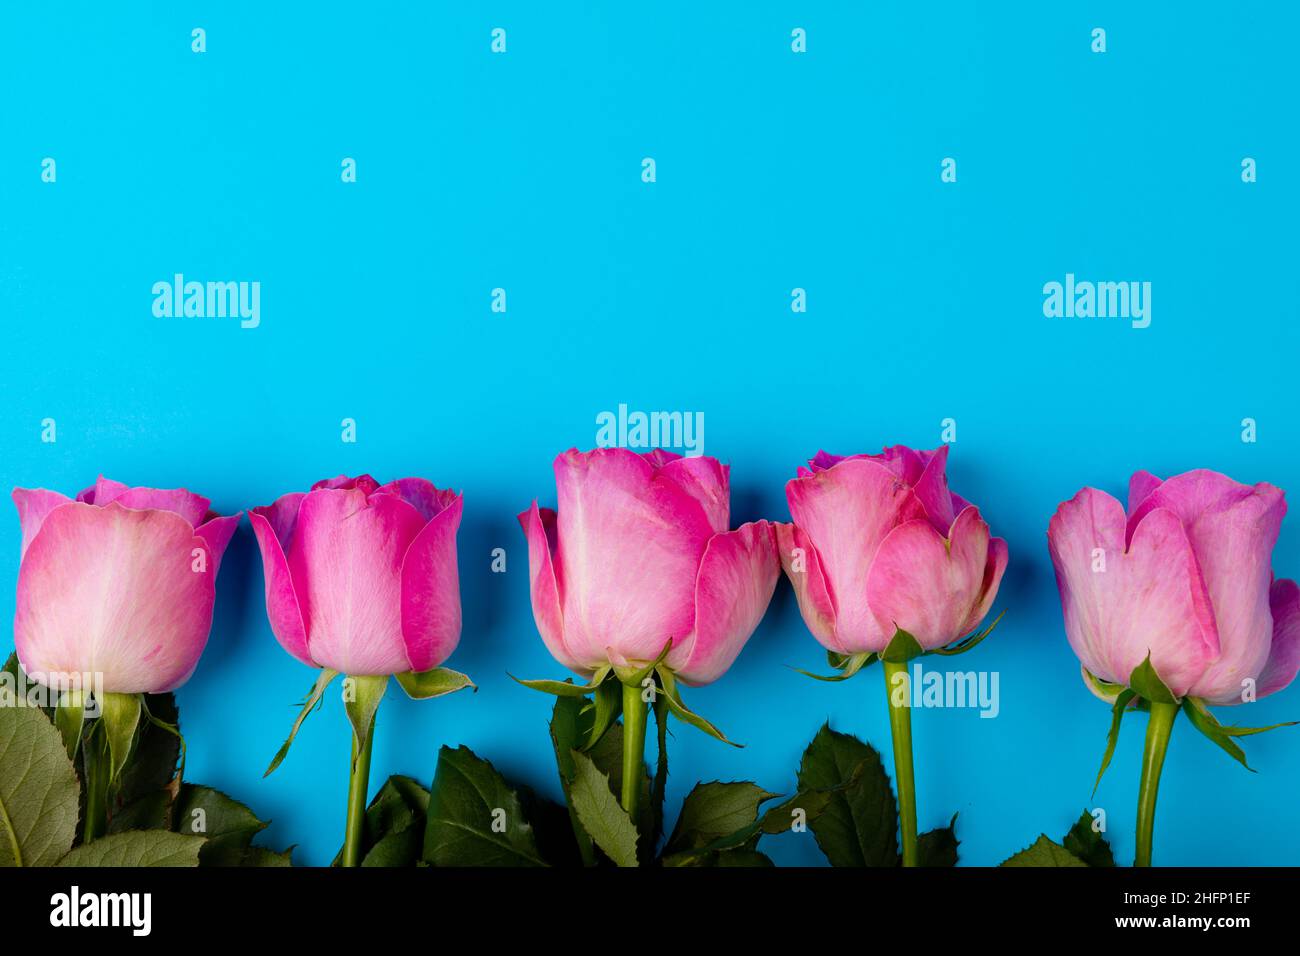 Overhead view of fresh pink roses by each other with copy space on blue background Stock Photo